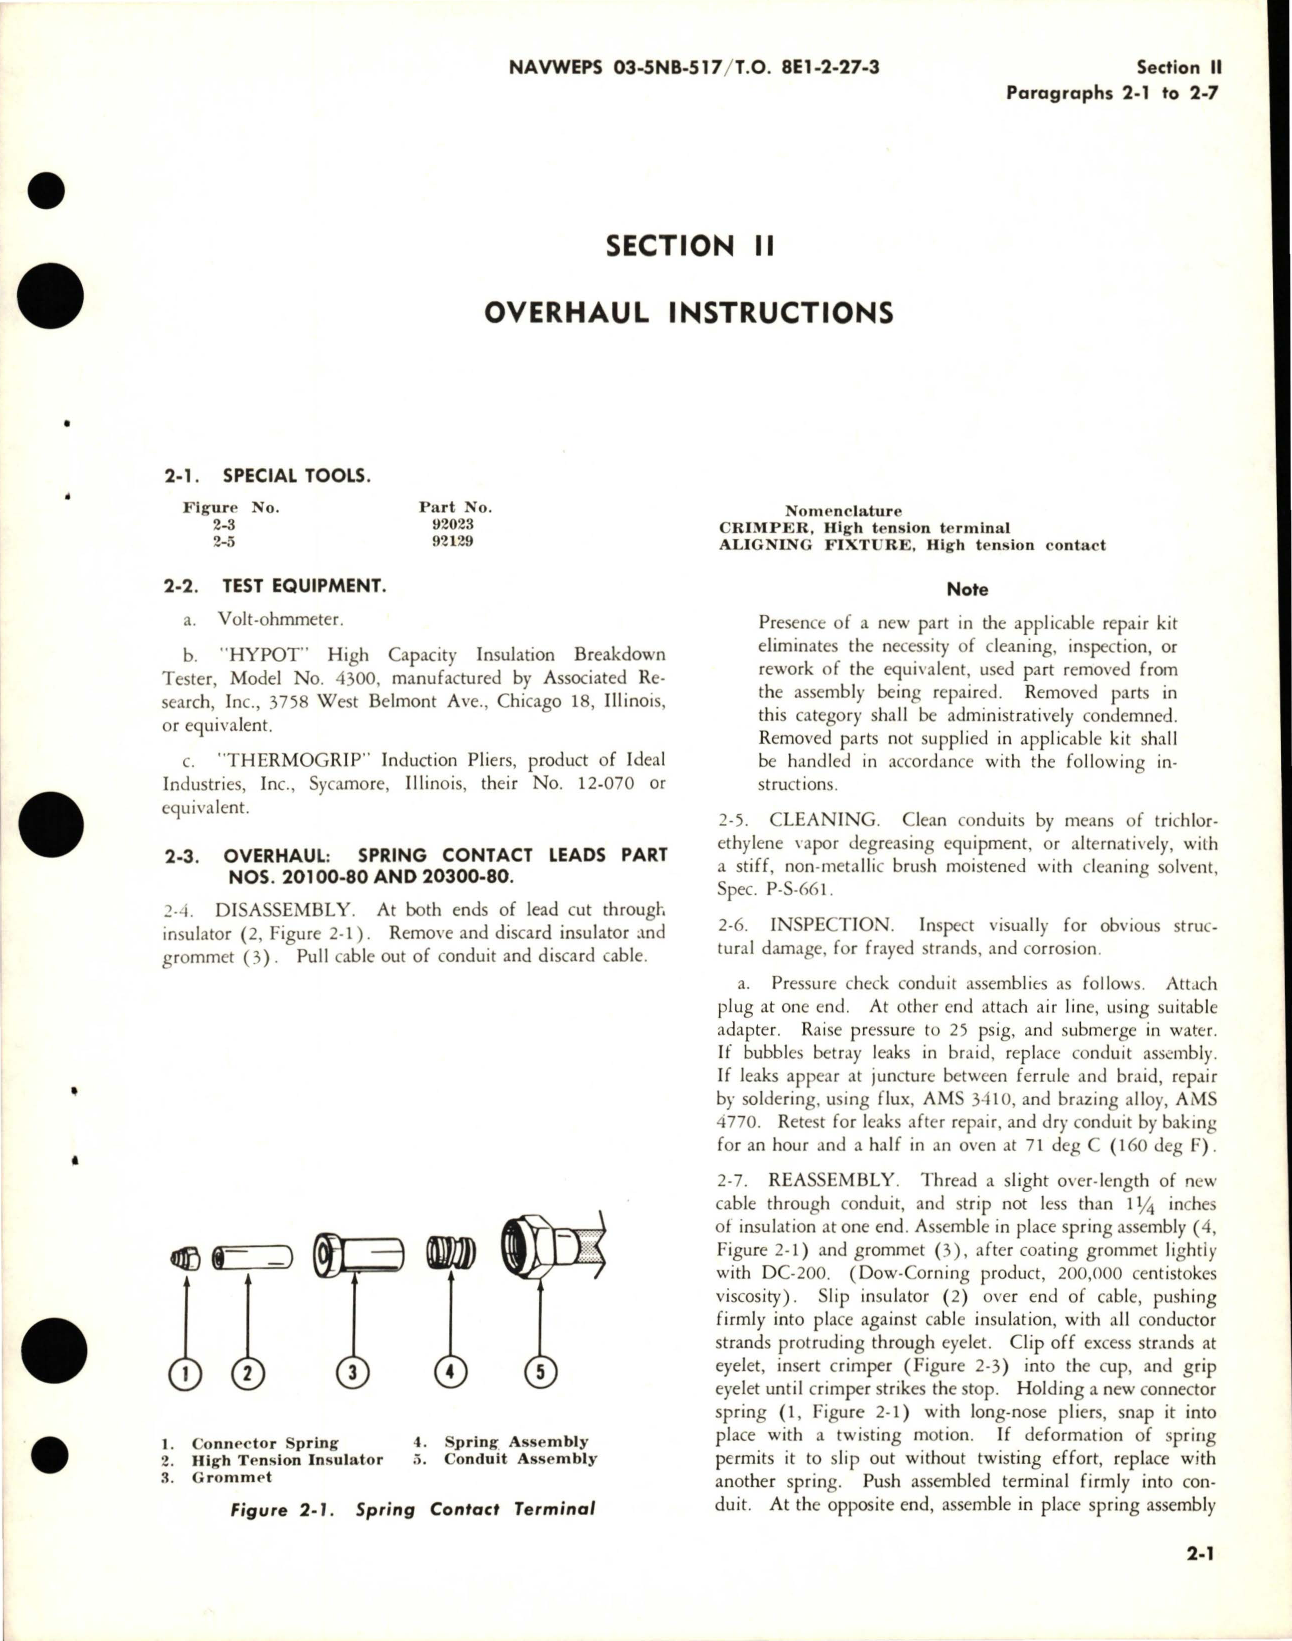 Sample page 7 from AirCorps Library document: Overhaul Instructions for High Tension Ignition Leads 